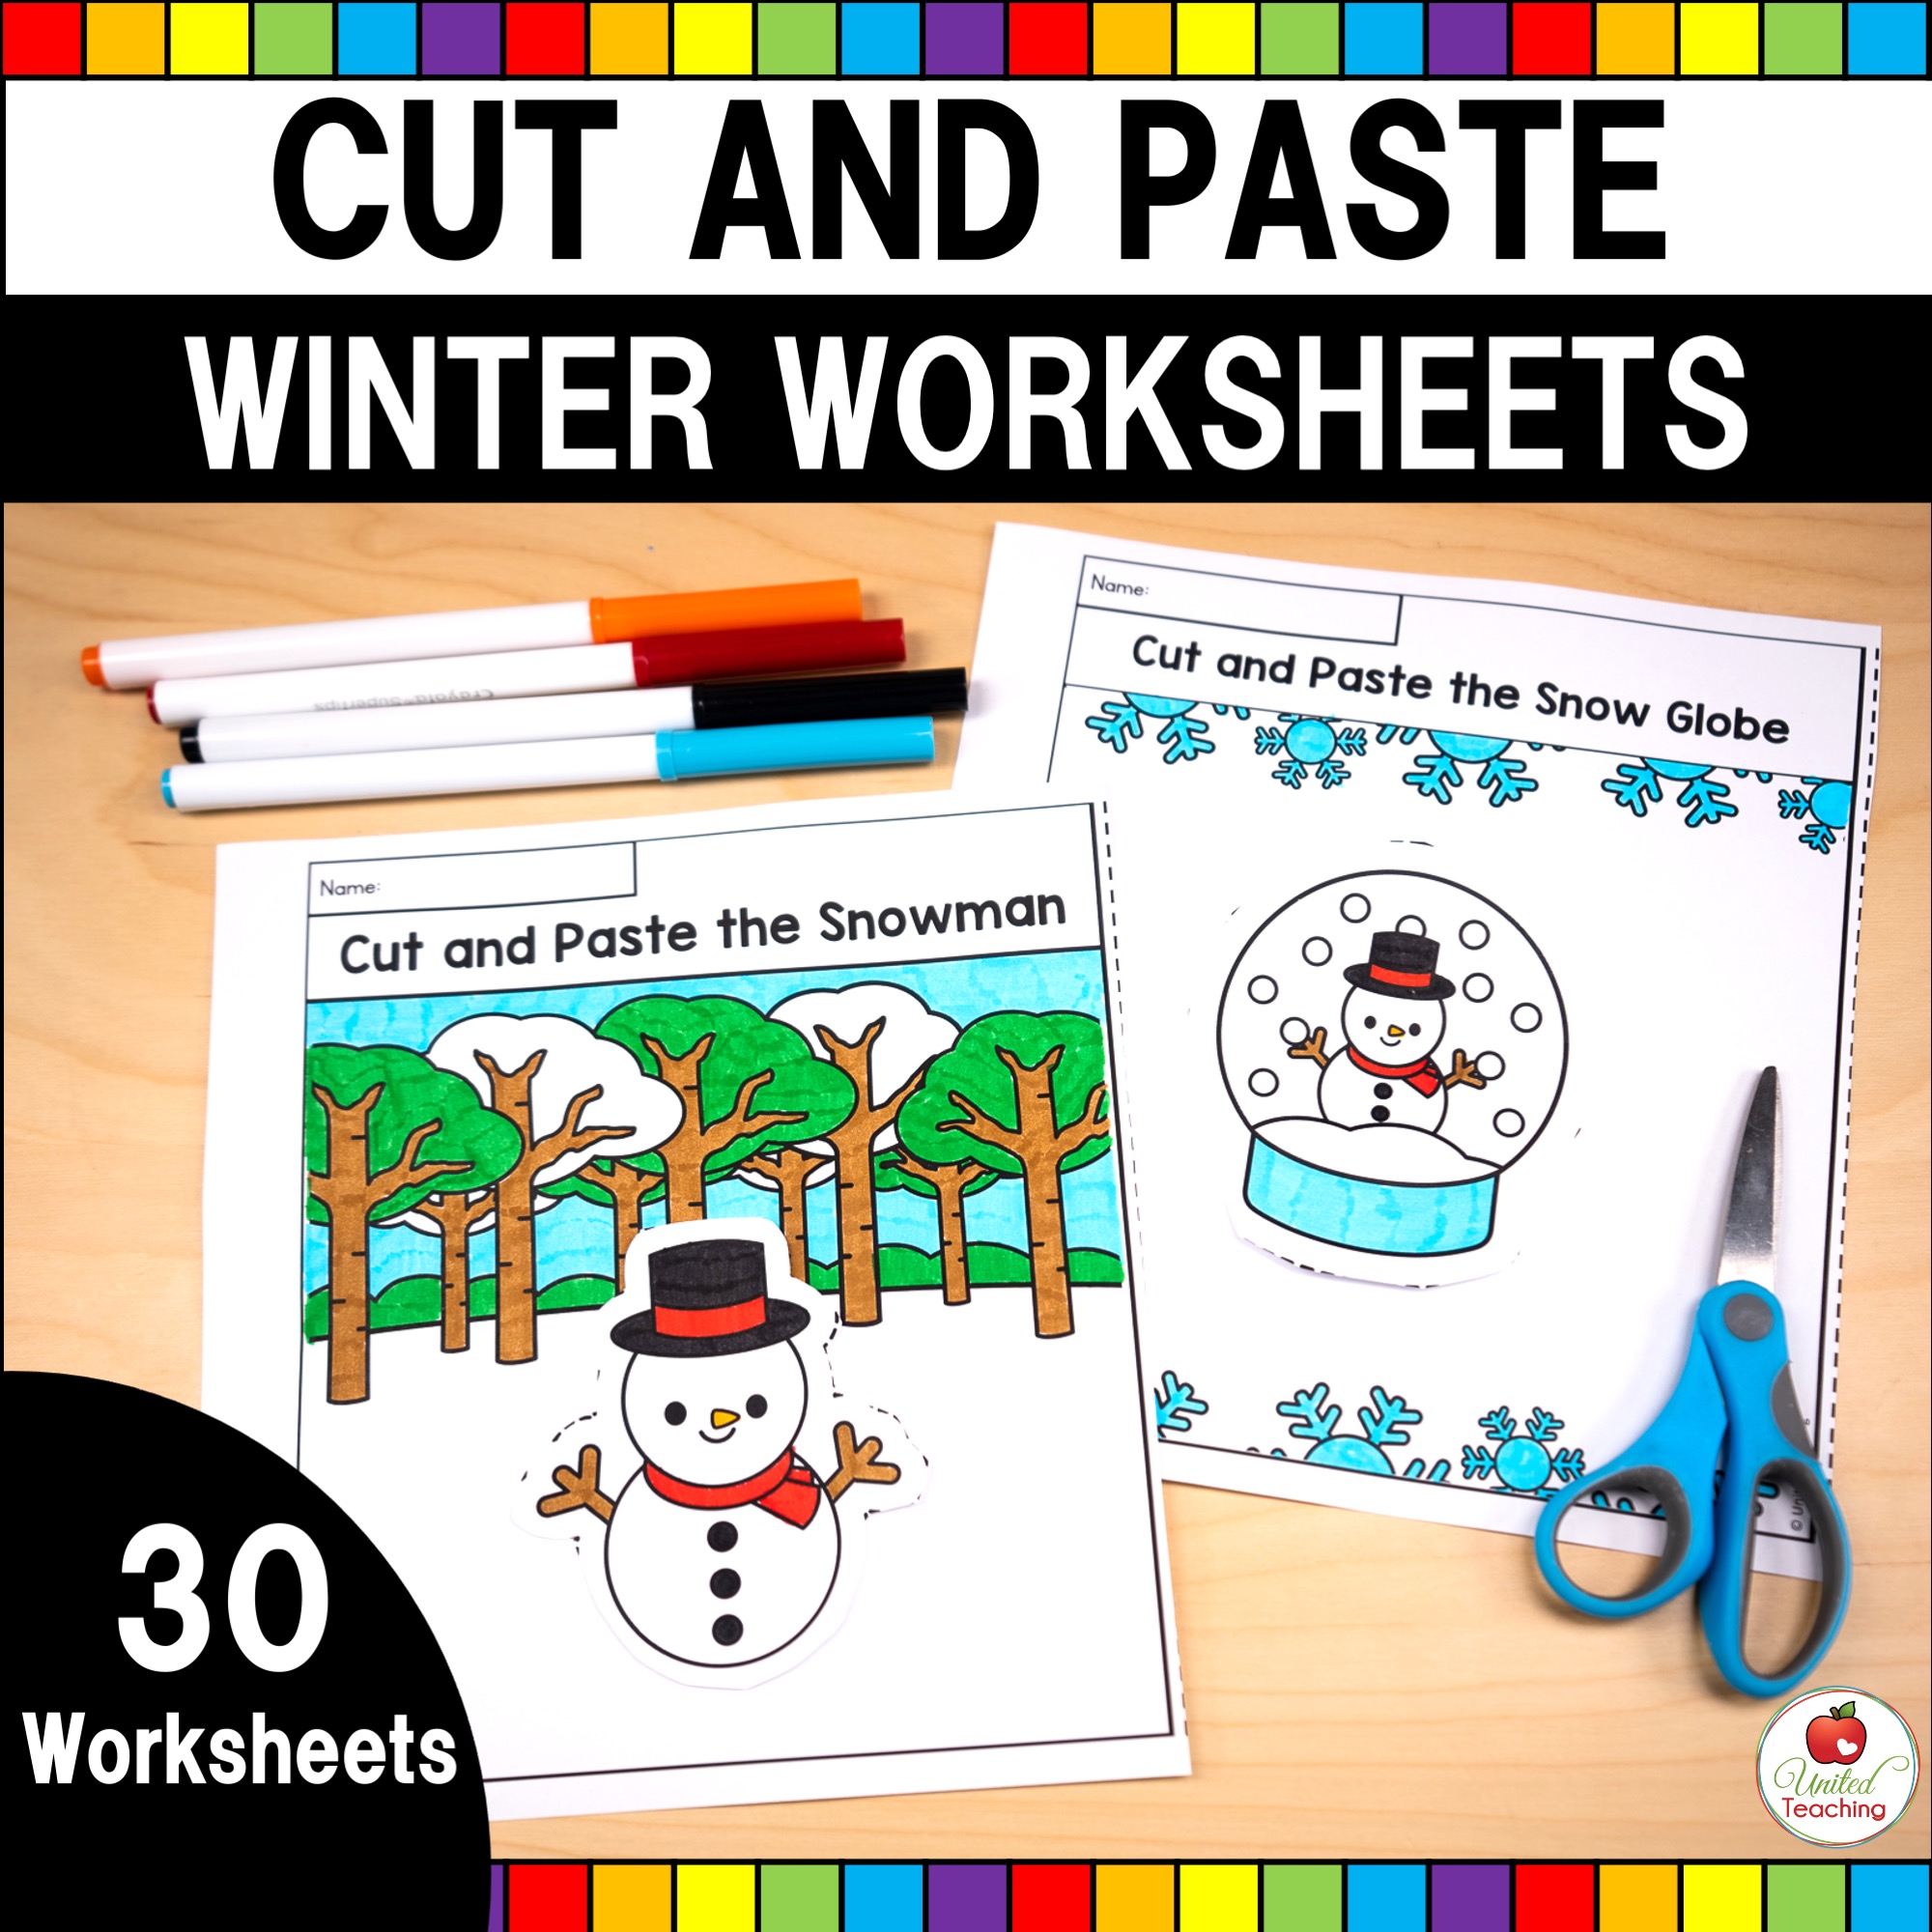 Winter Cut and Paste Worksheets Cover